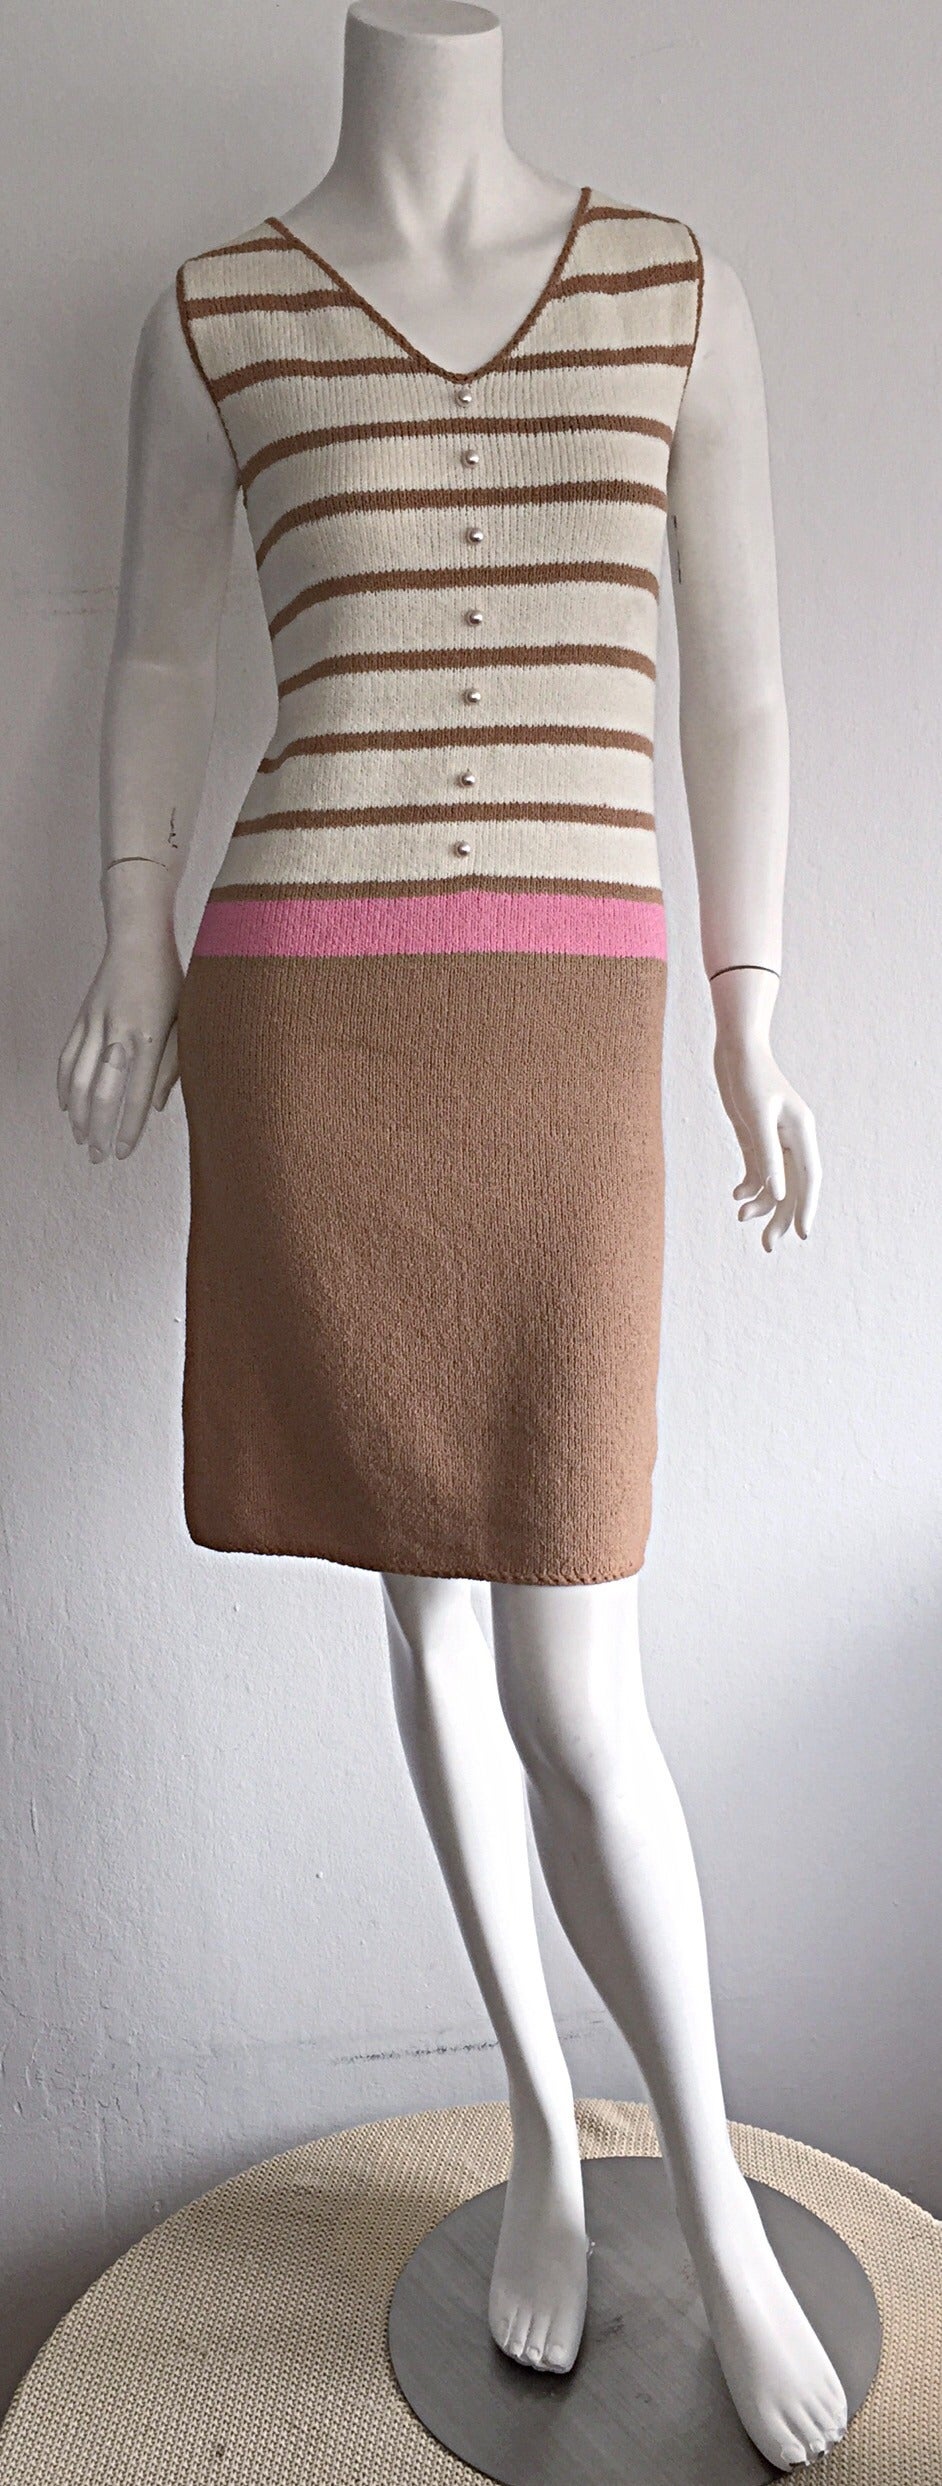 Tres chic 1960s vintage St. John knit dress! Pink/tan/cream stripes, with 7 pearls down the bodice. One of the earliest St. John pieces to own! Looks great with sandals, wedges, or heels. In great condition. Approximately Size Small-Medium (lots of